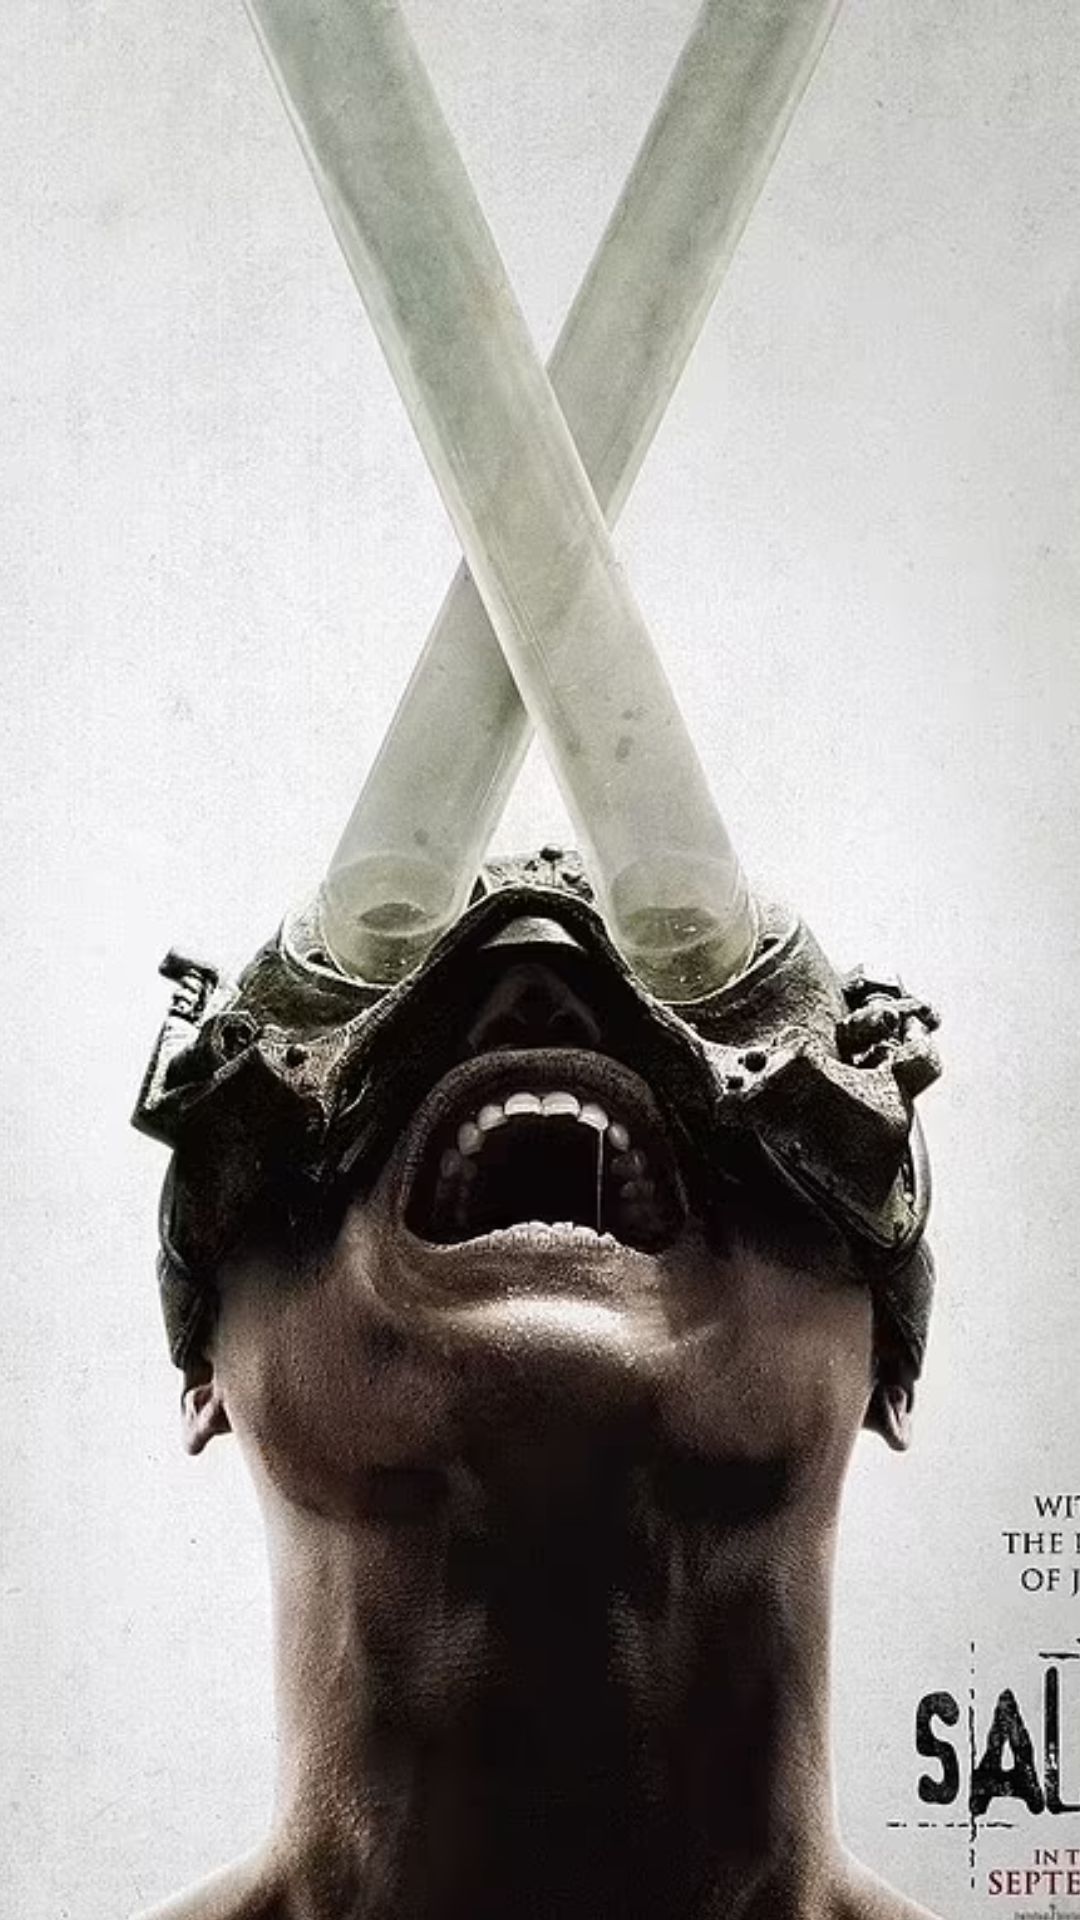 Fans are terrified after release of ‘Saw X’ poster